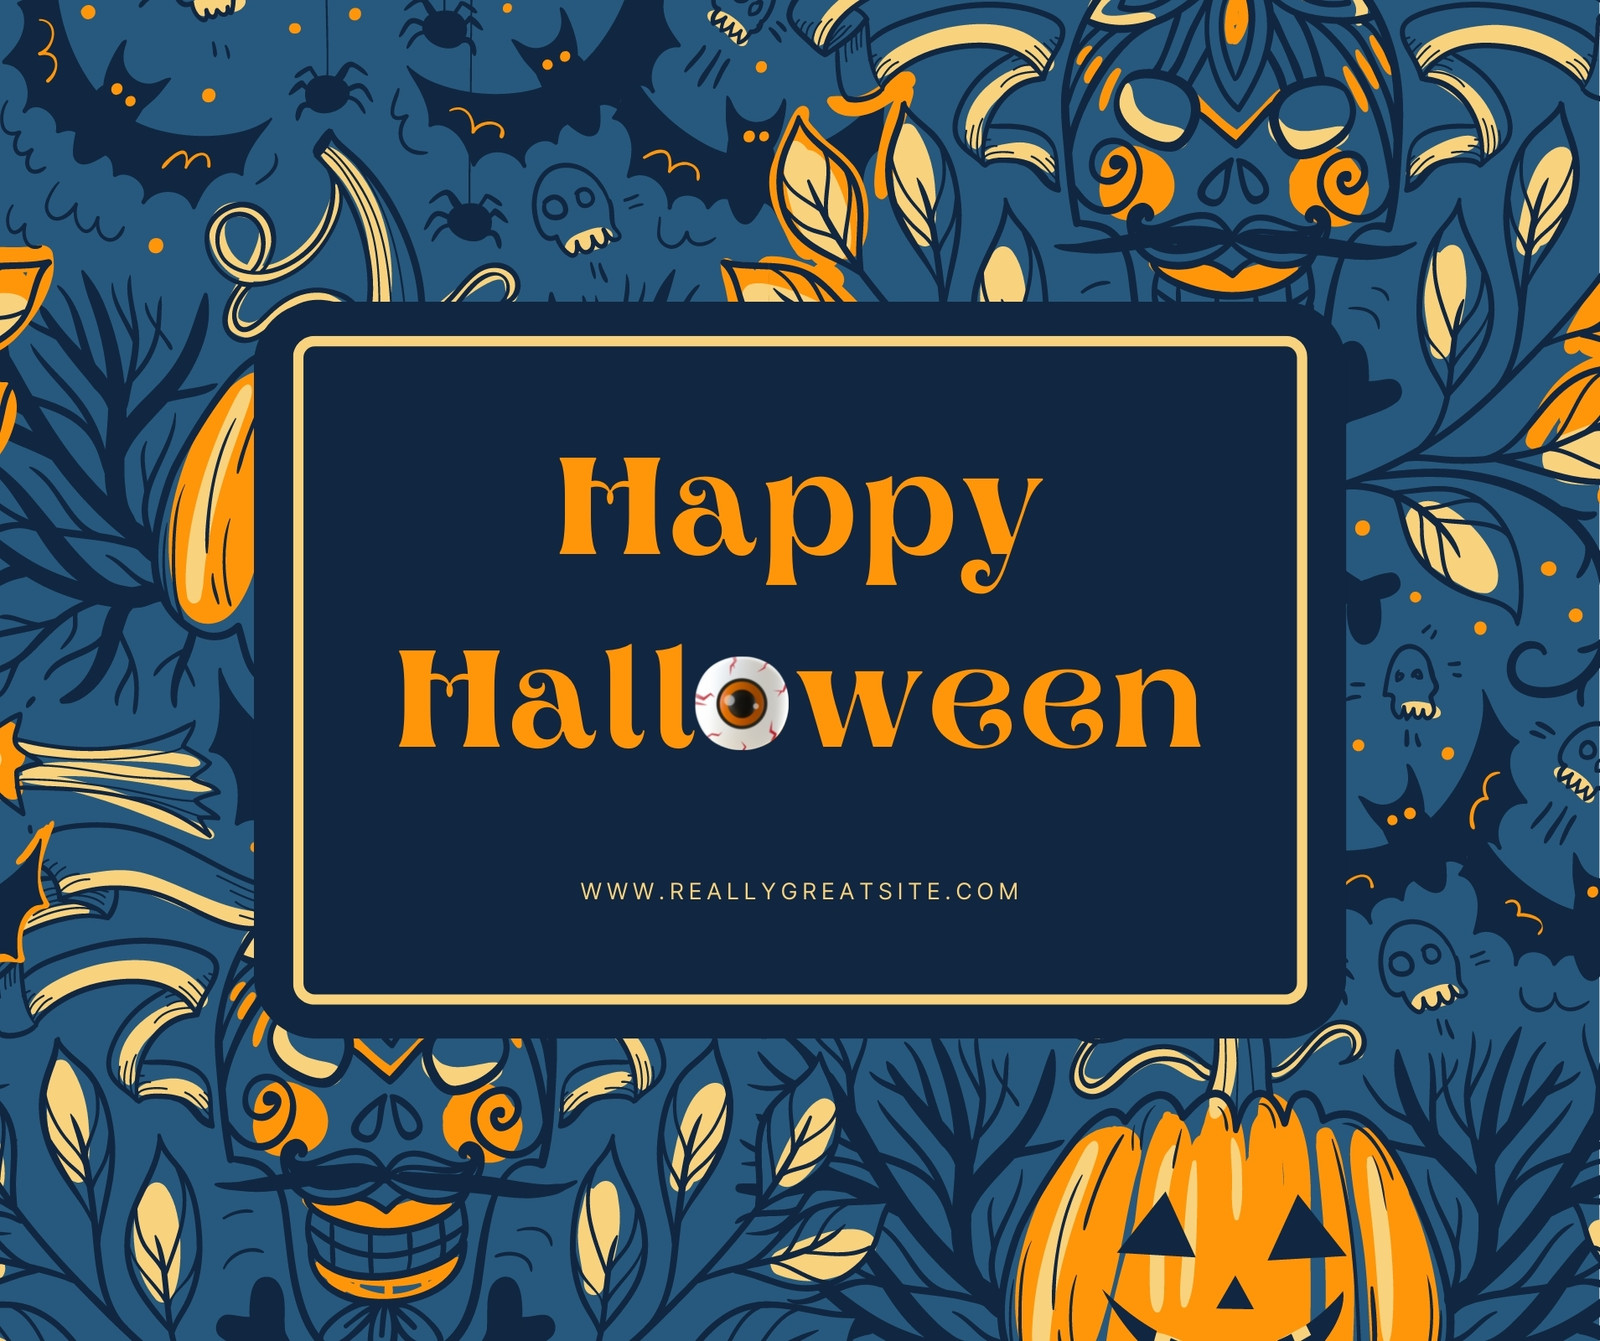 Page 6 - Free customizable Halloween Instagram post templates